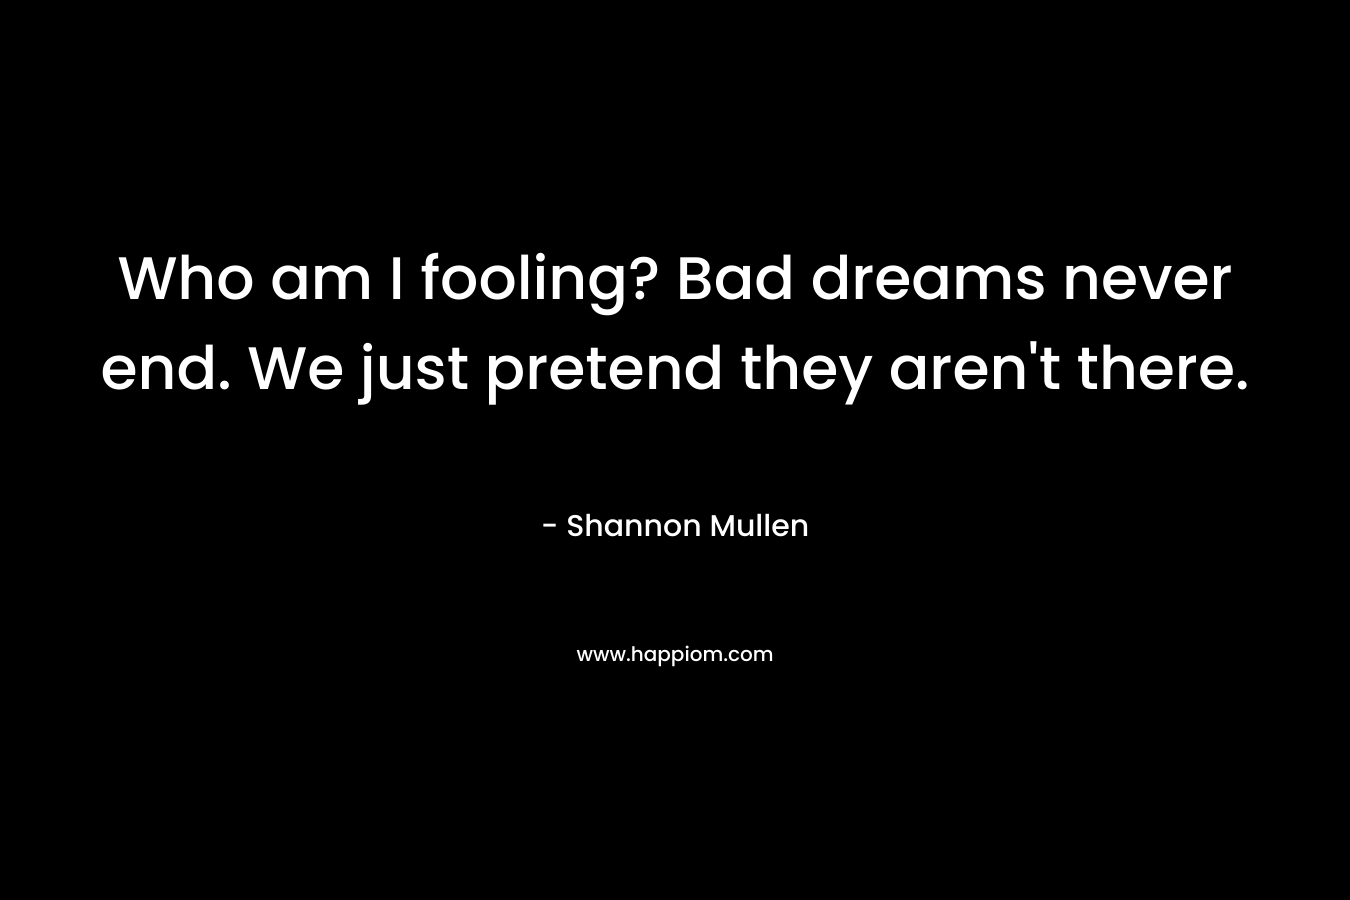 Who am I fooling? Bad dreams never end. We just pretend they aren't there.